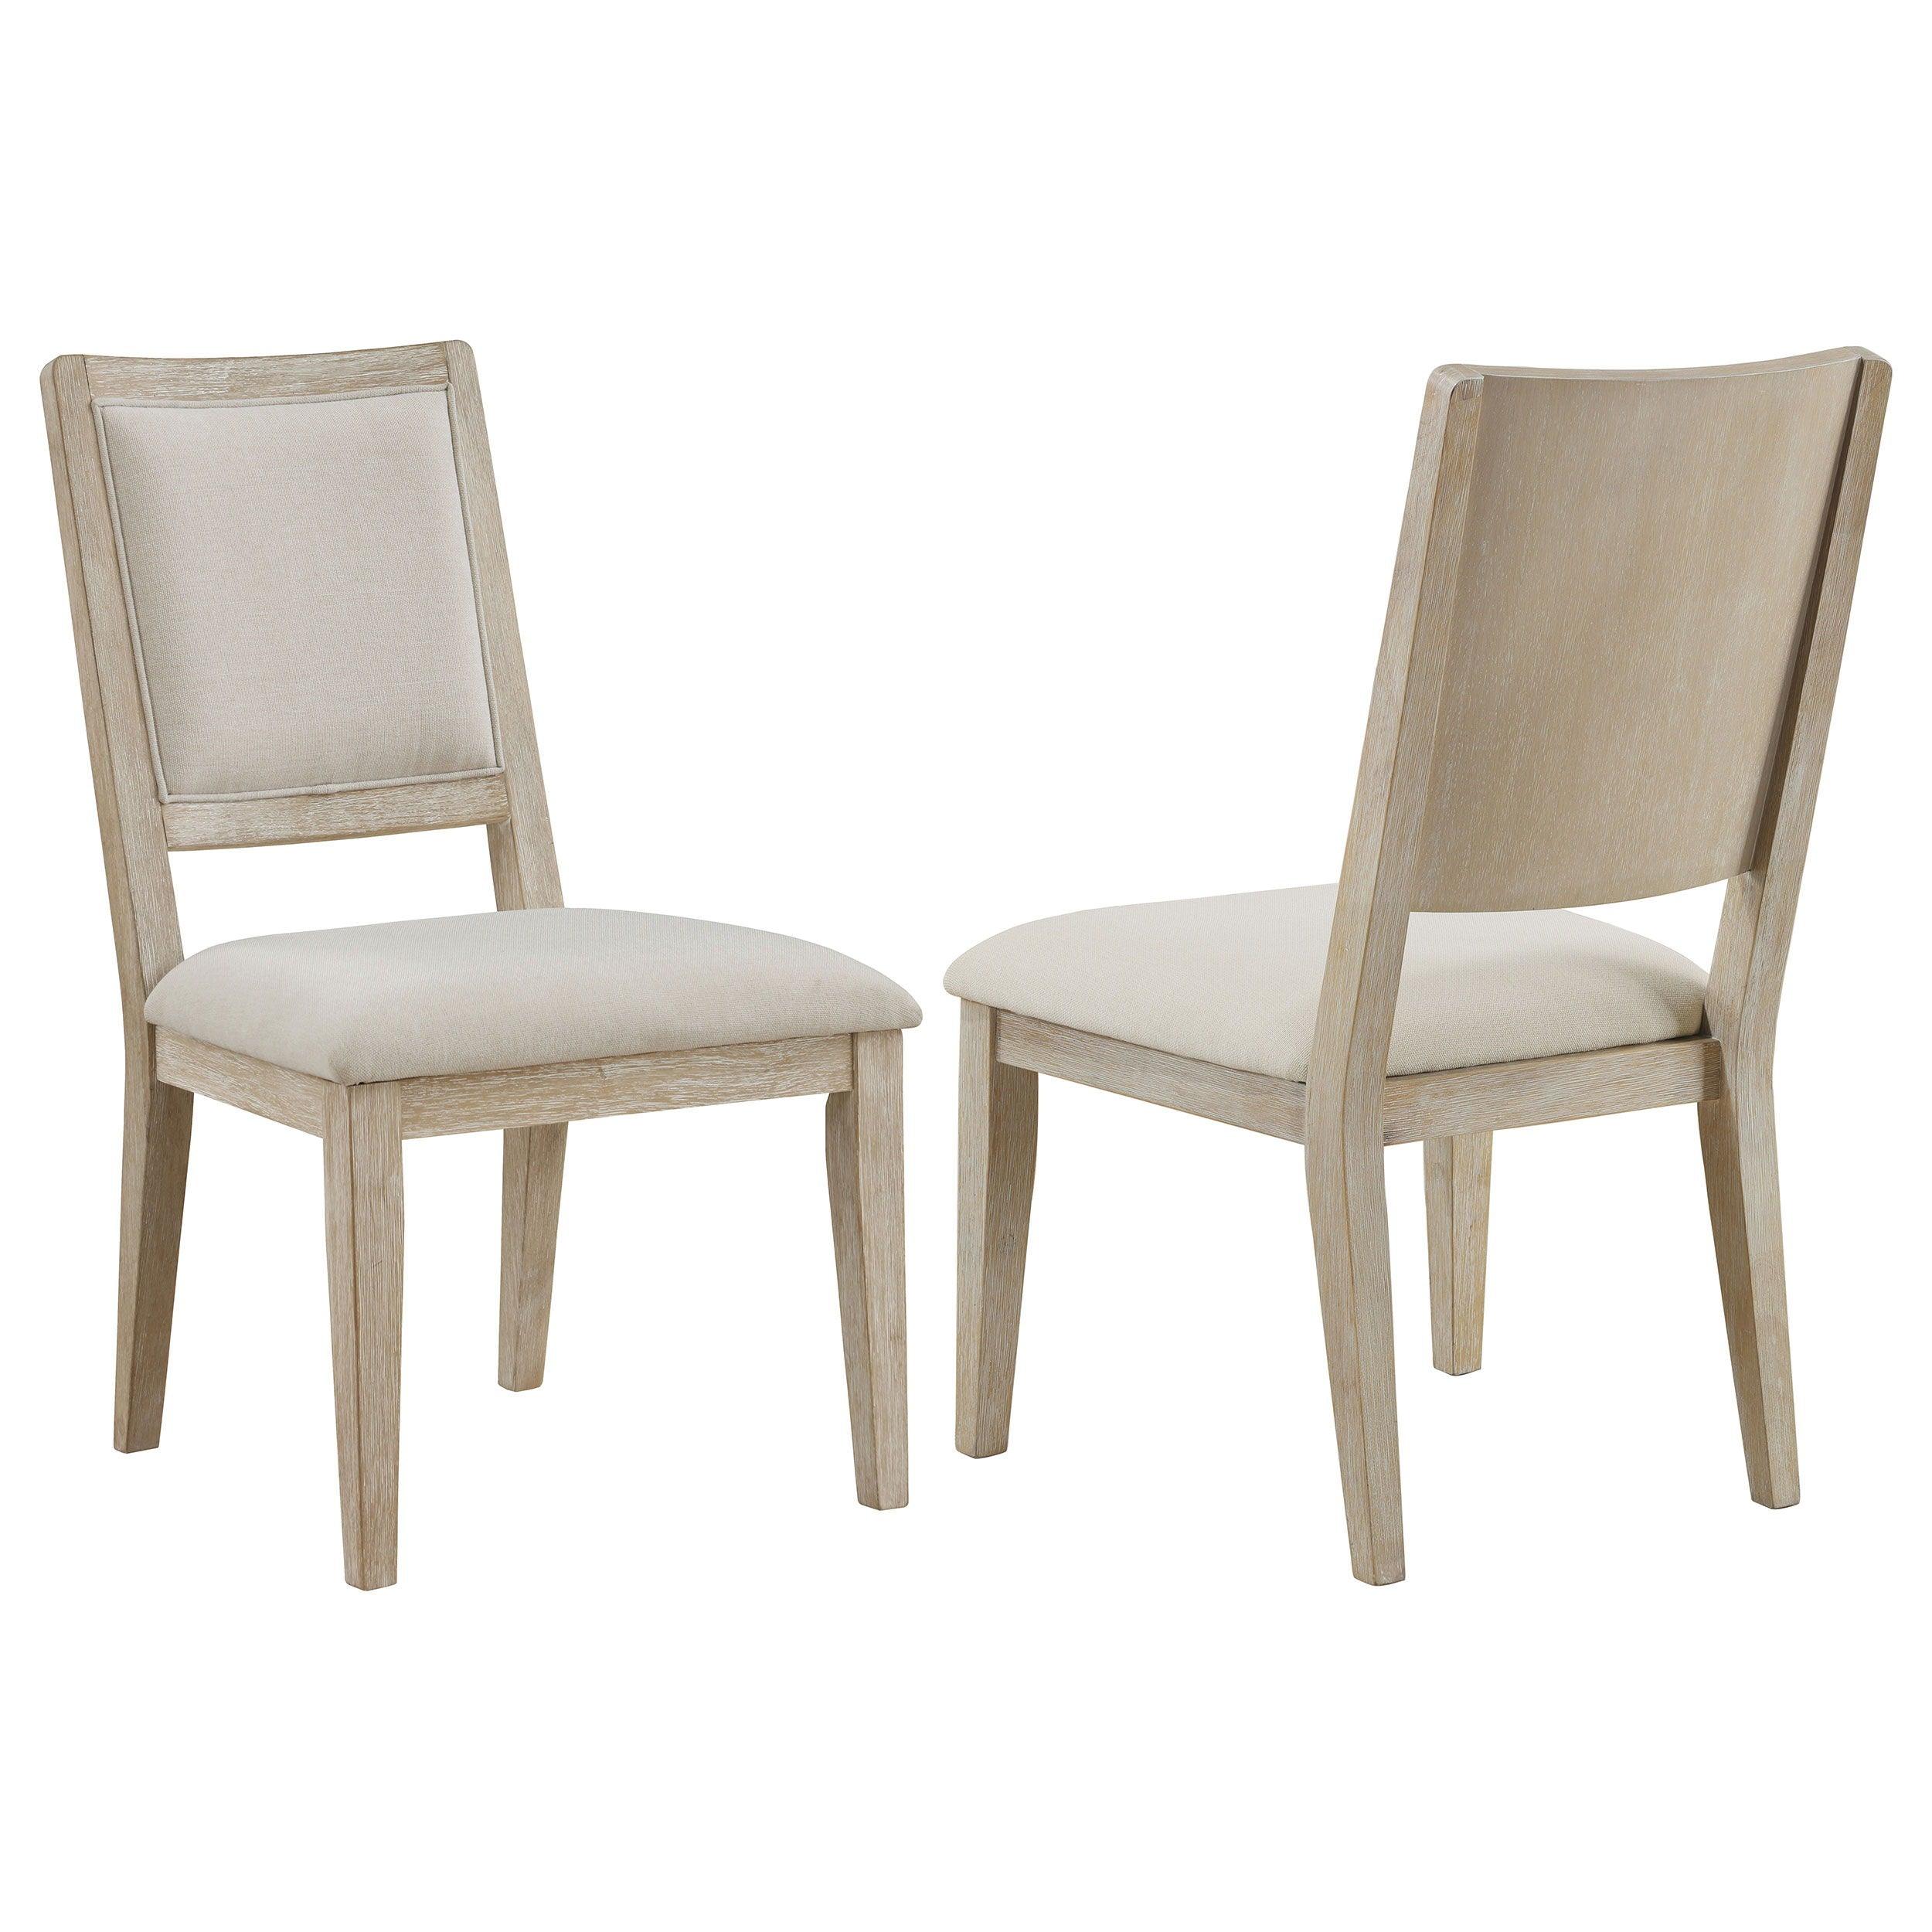 Coaster Fine Furniture - Trofello - Upholstered Dining Side Chair (Set Of 2) - White Washed And Beige - 5th Avenue Furniture